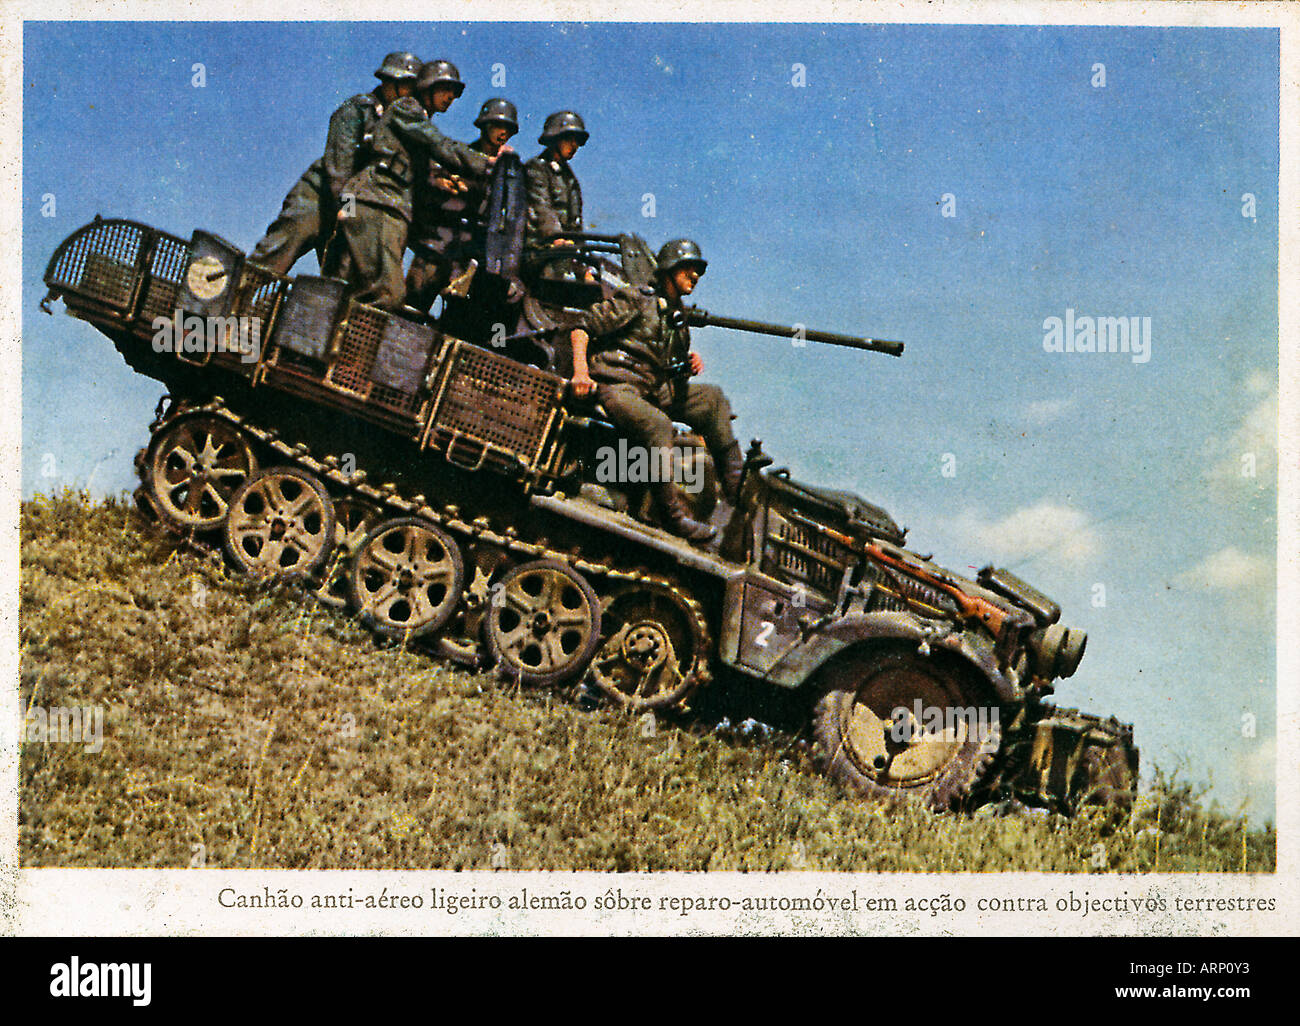 Zugkraftwagon German postcard of the half track personnel carrier equiped with an anti aircraft cannon descending a hill Stock Photo